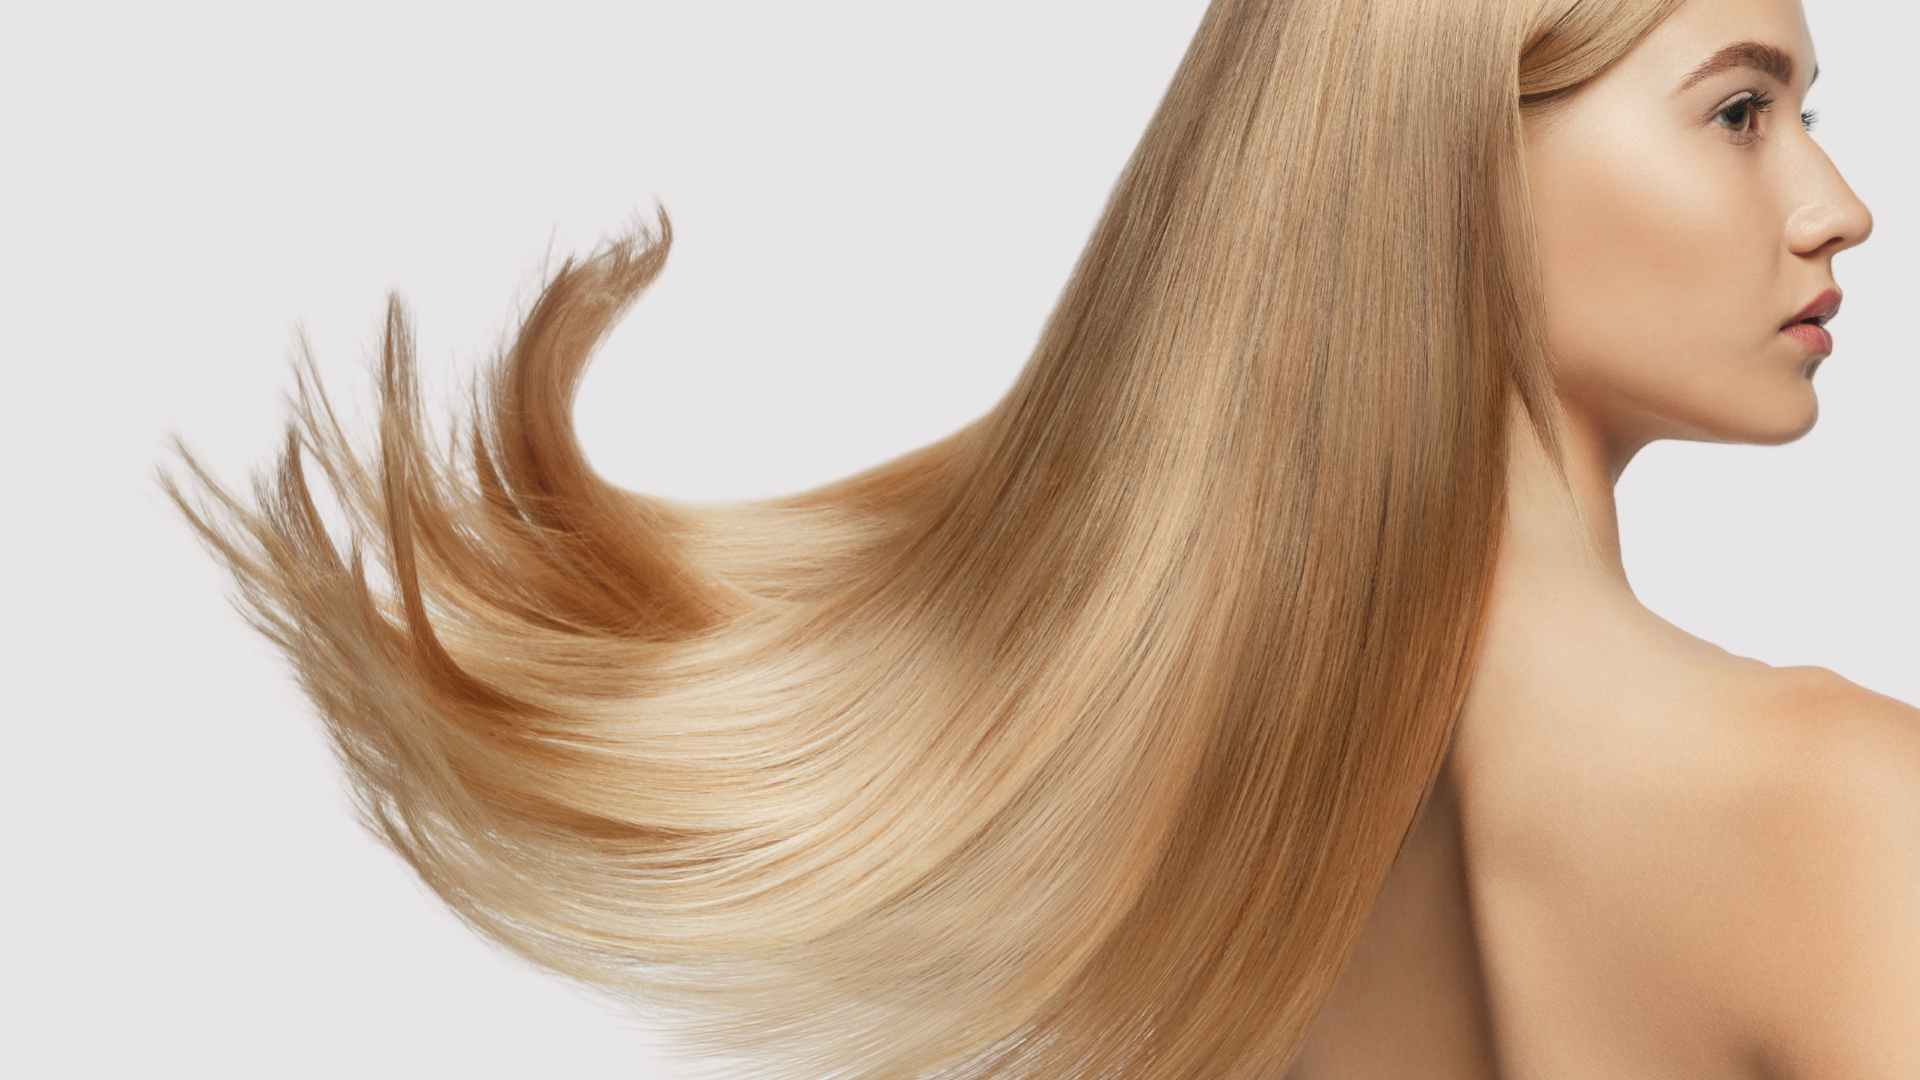 female with flowing long blonde fine hair, free from damage